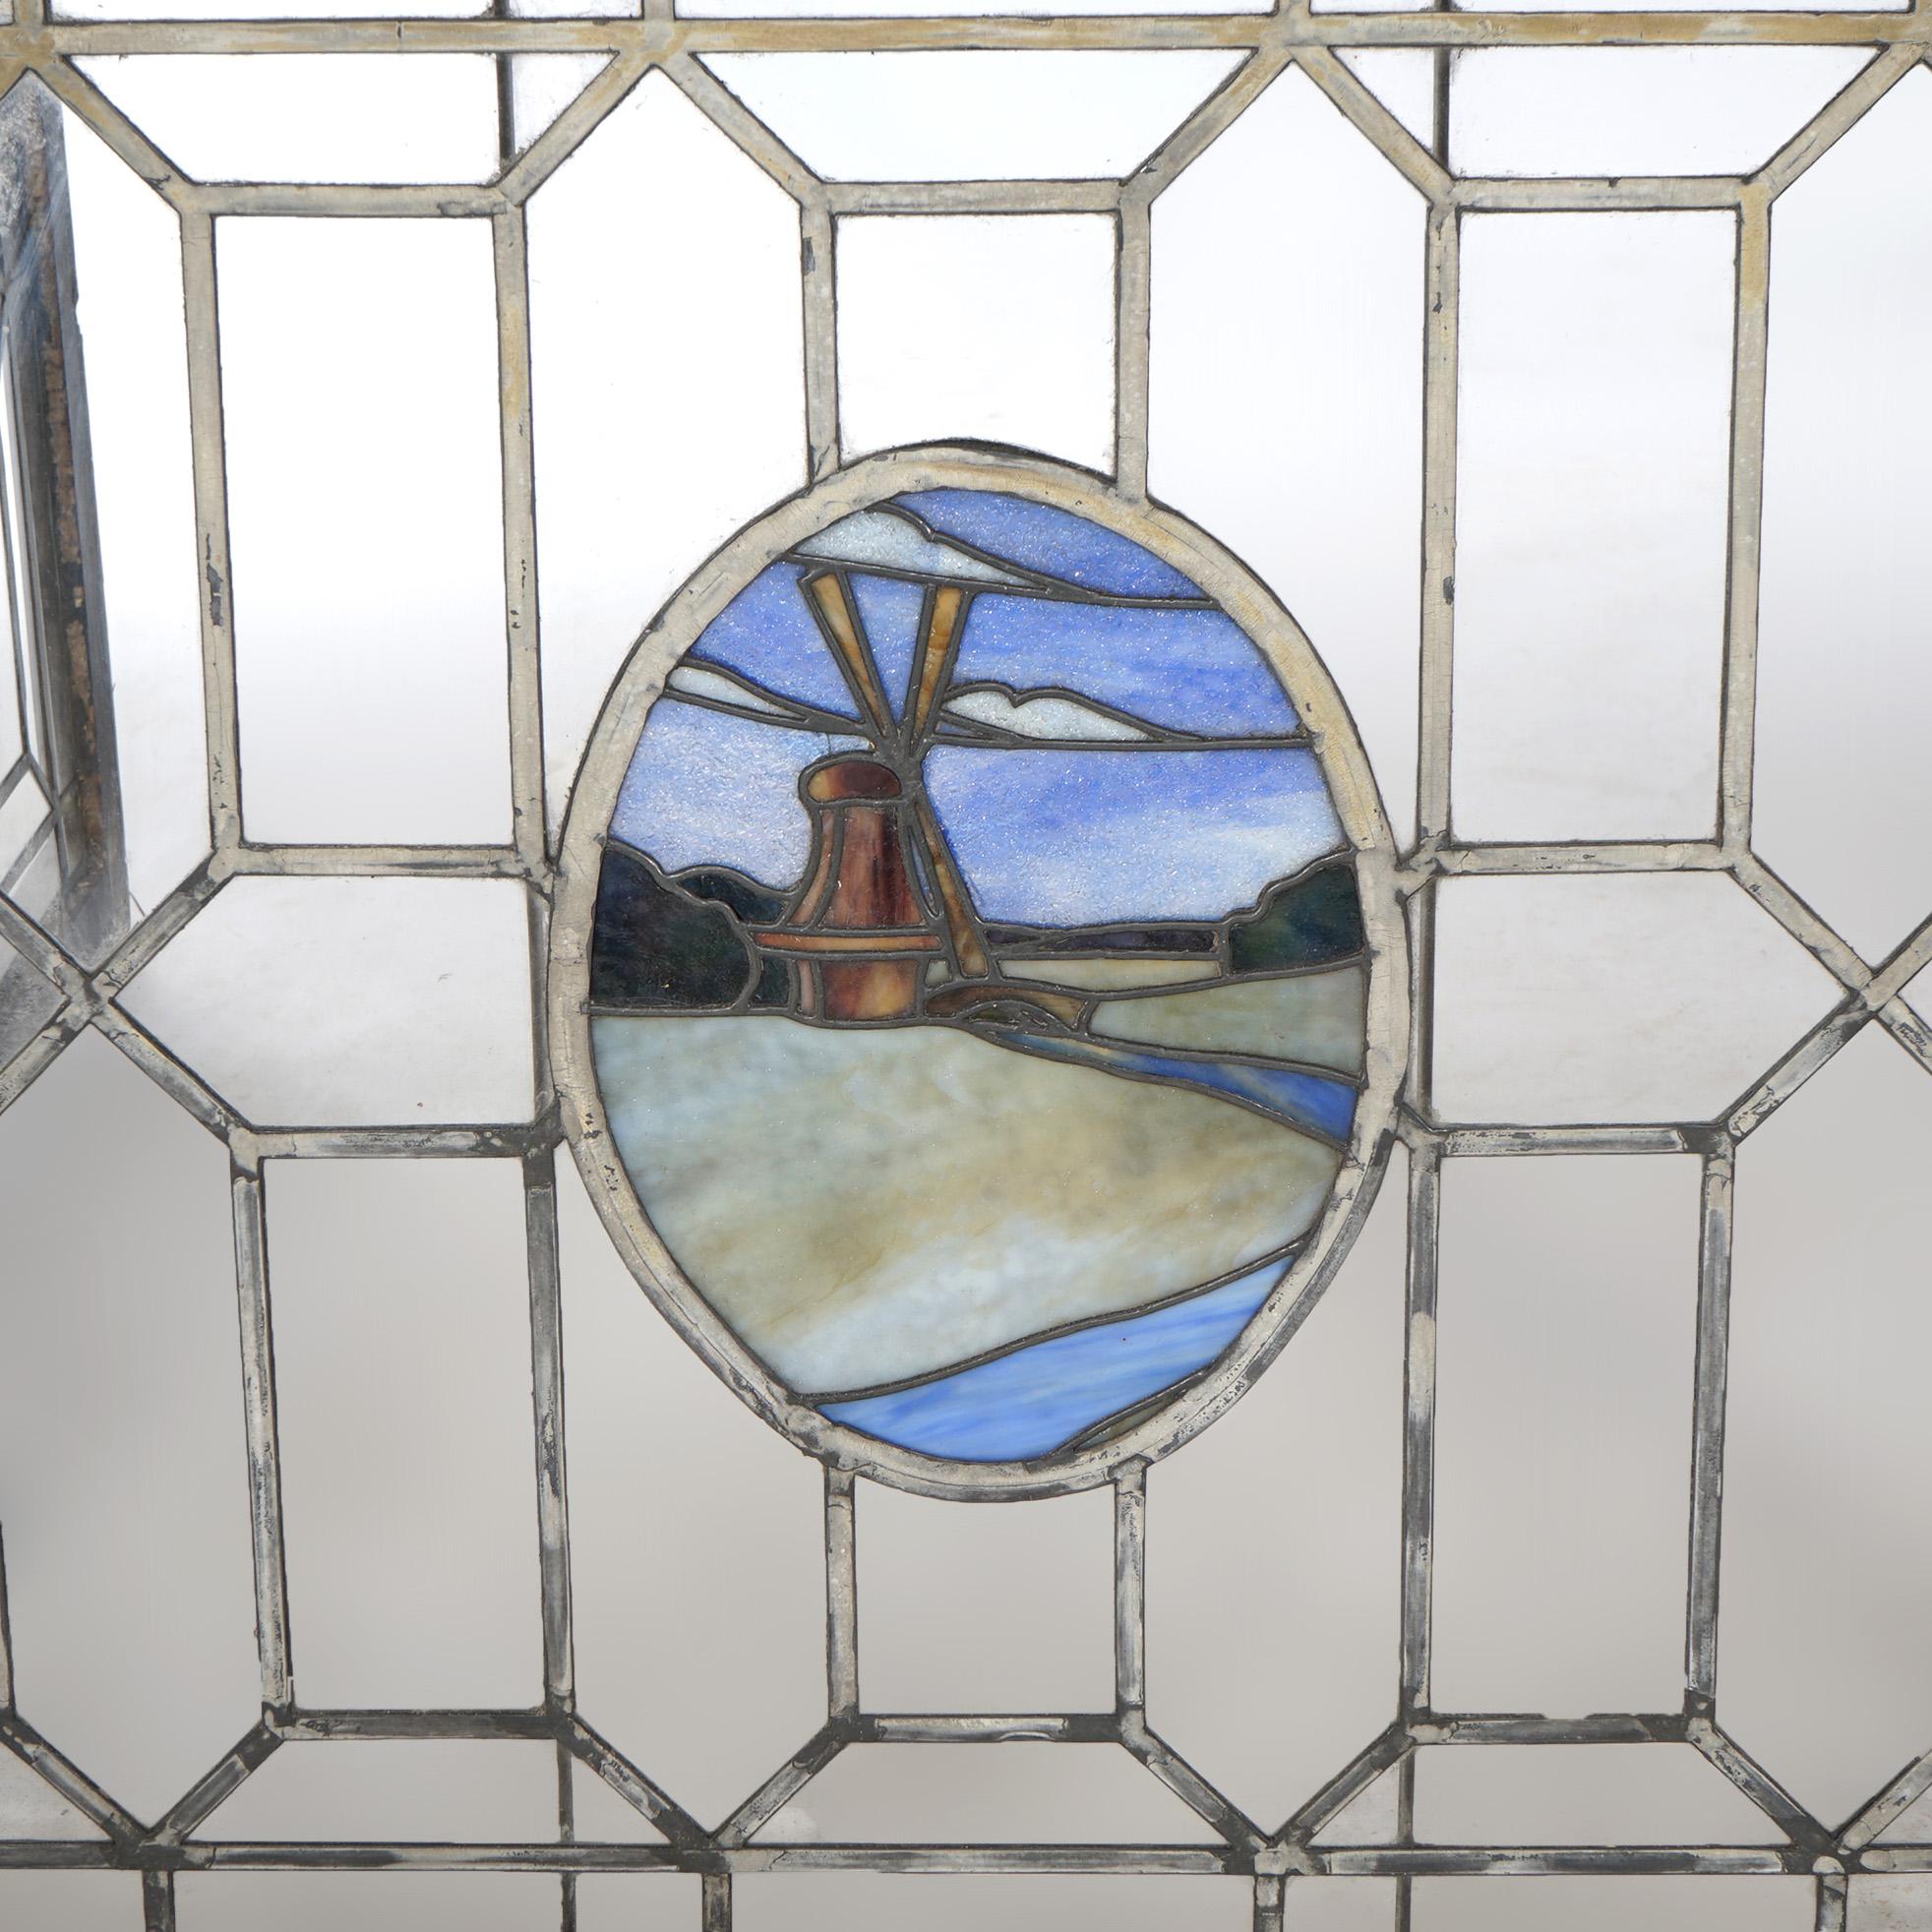 An antique Arts & Crafts window offers leaded glass construction with colorless panels surrounding central reserve with windmill in countryside setting, seated in wood sash, c1910

Measures - 32